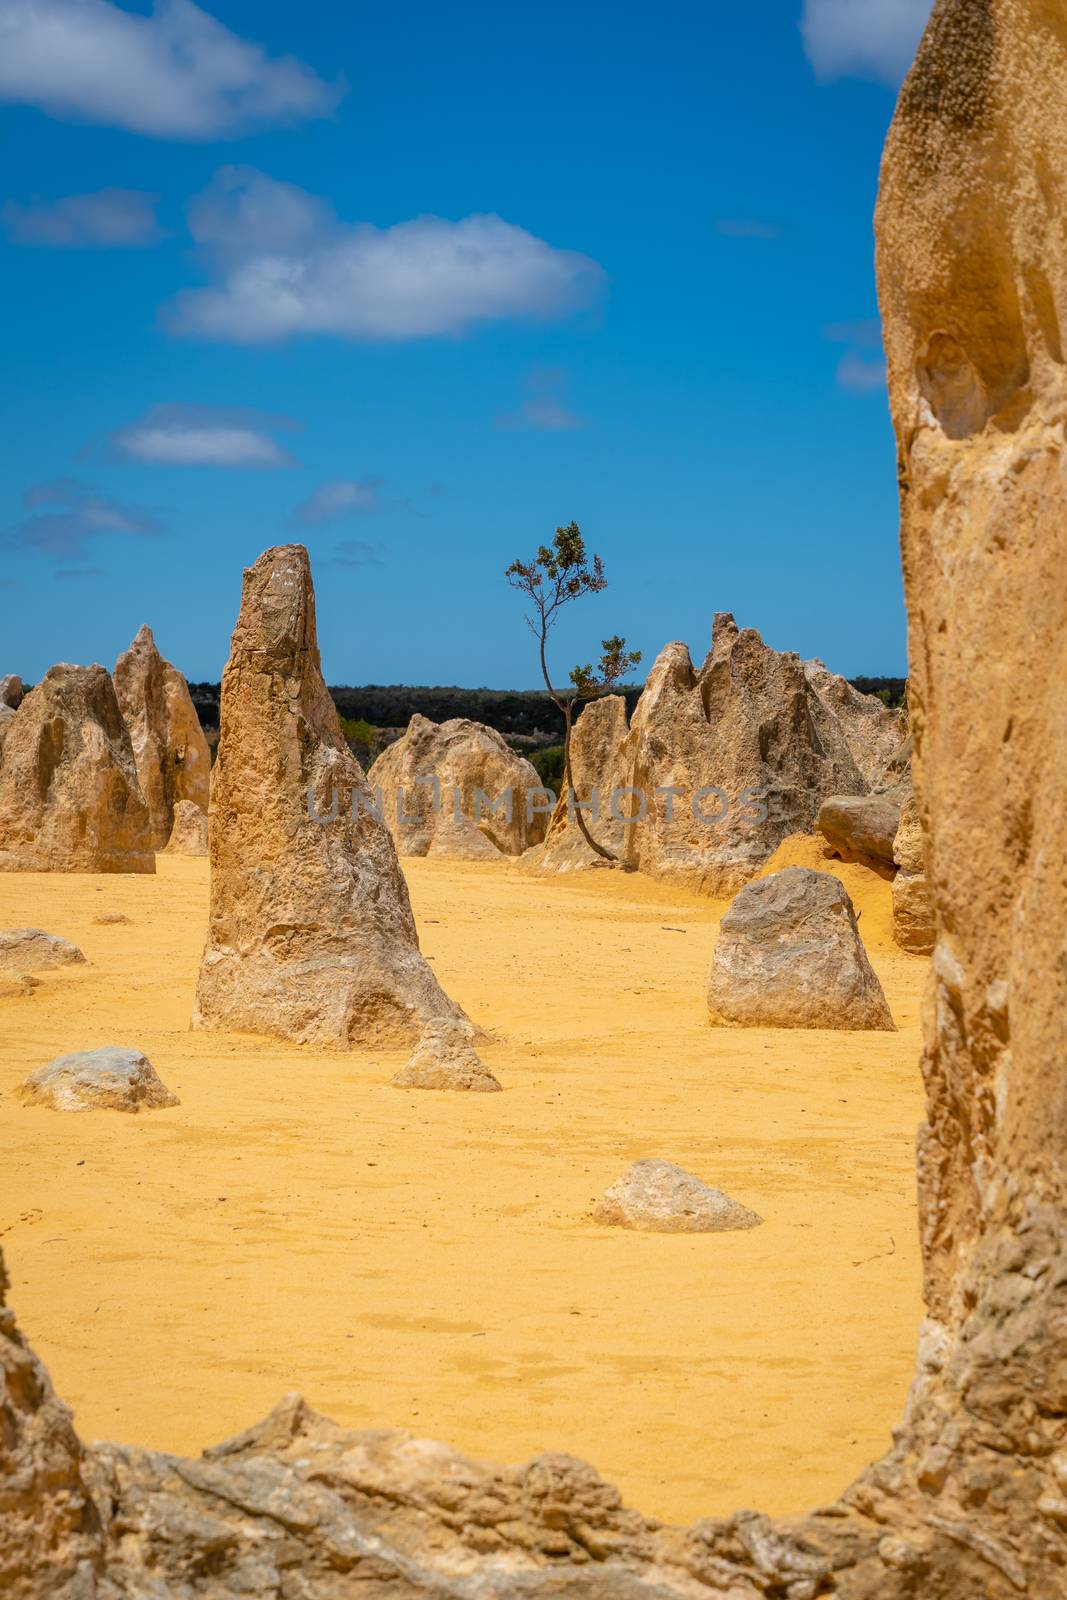 Upright standing rock formations at the Pinnacles Desert, Western Australia